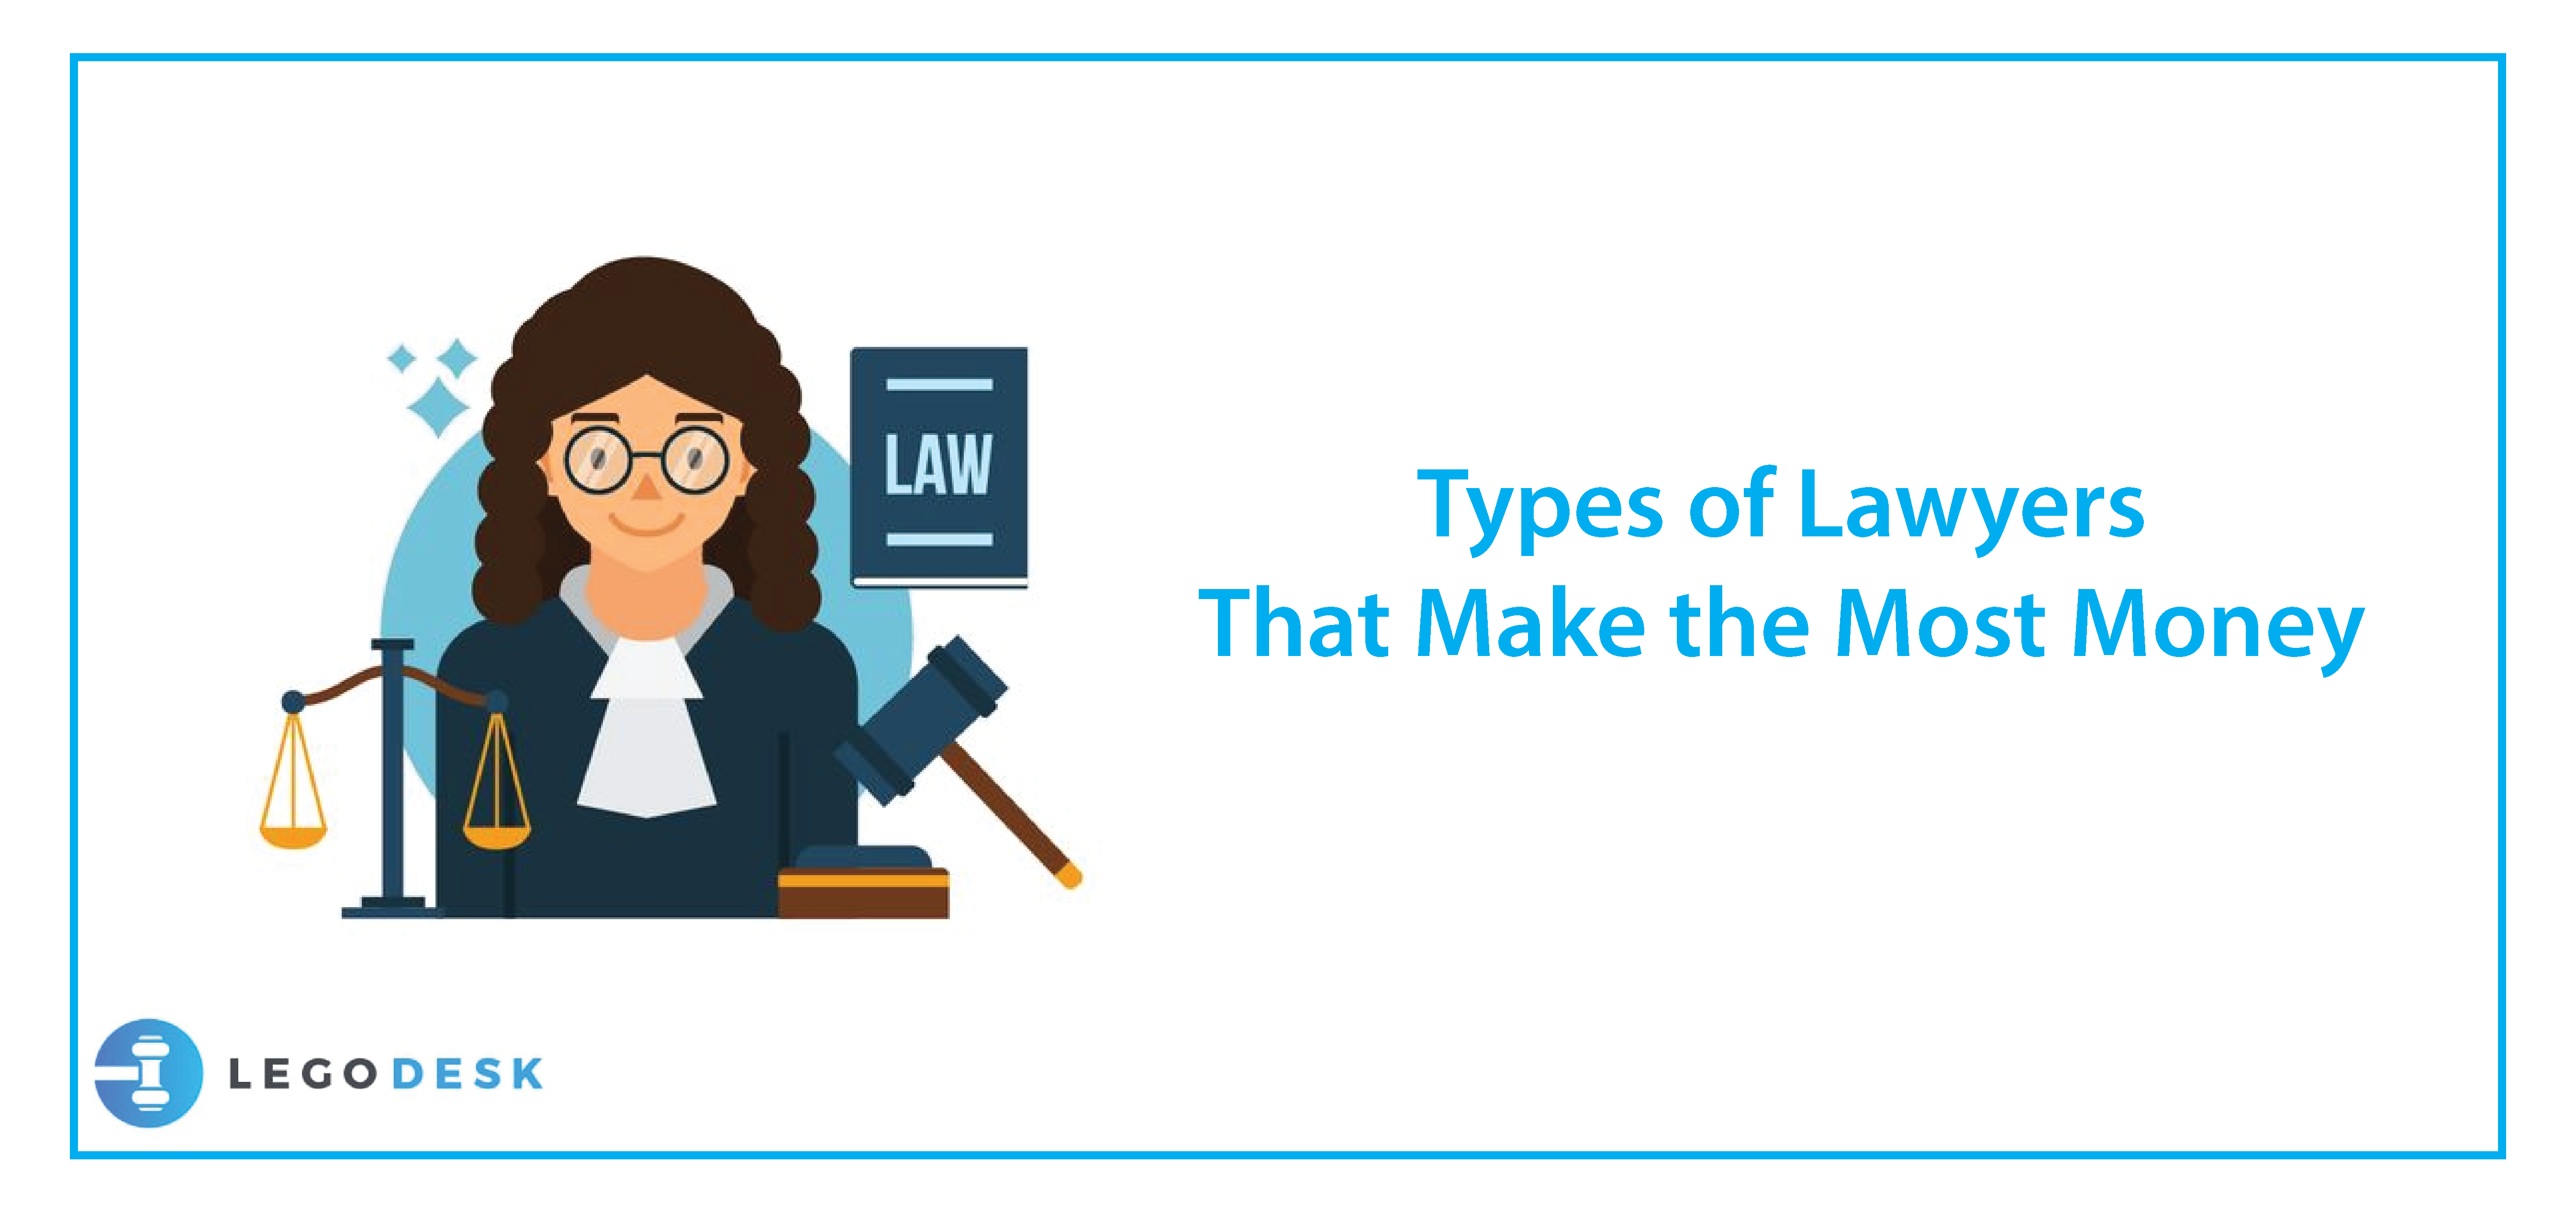 Types of Lawyers That Make the Most Money